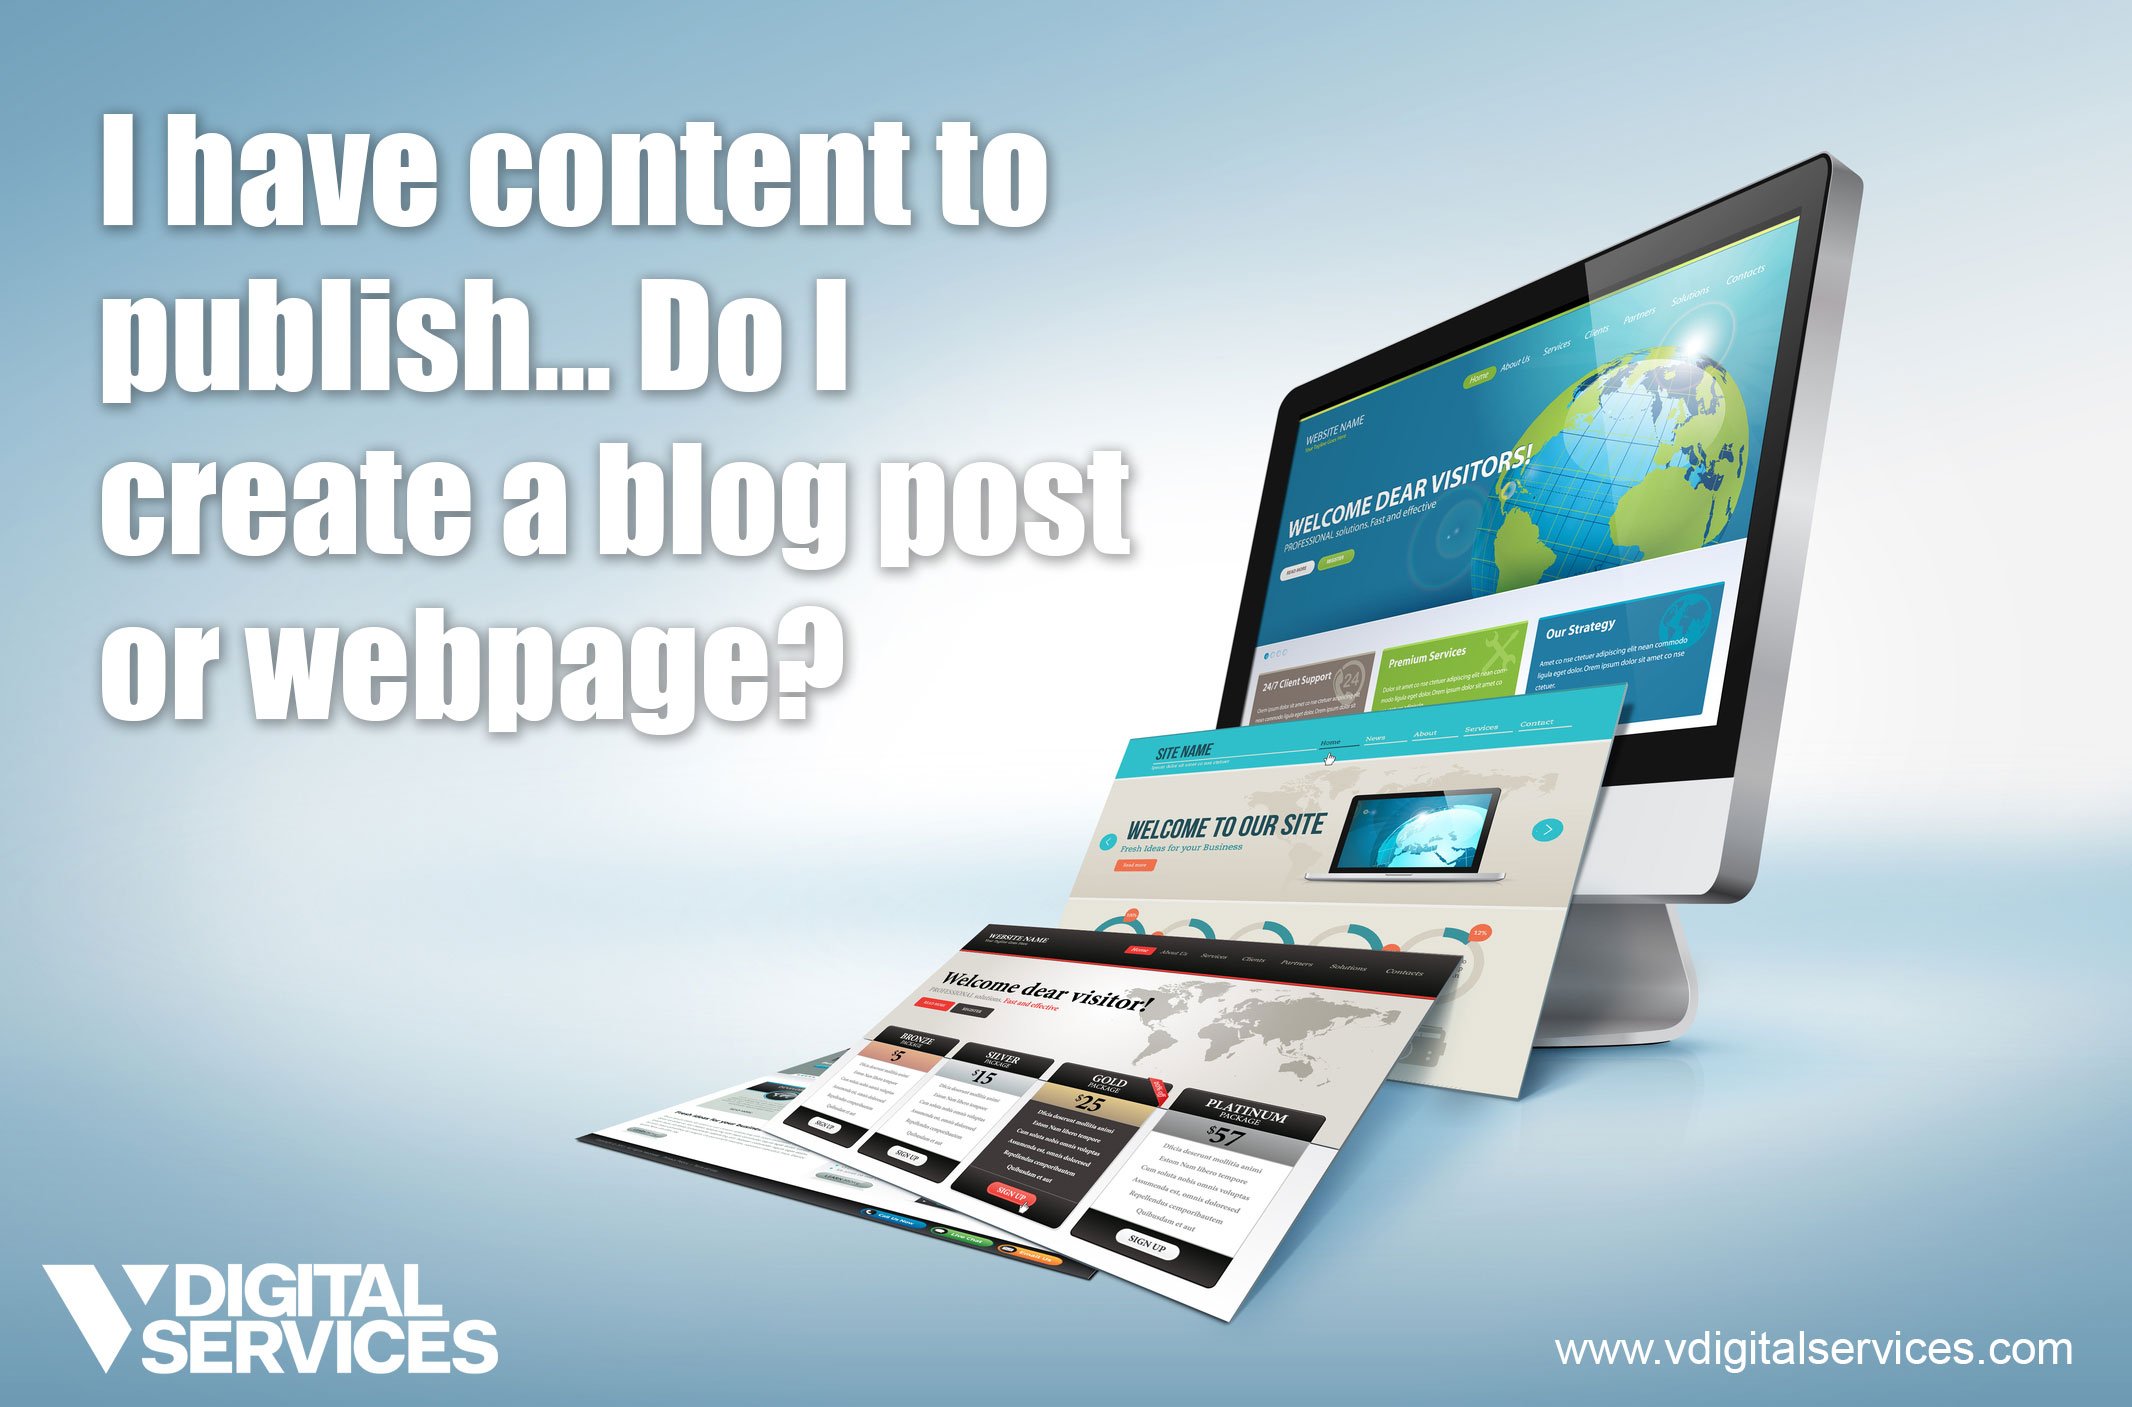 V Digital Services - How to Get More Website Traffic Without Paid Media: Webpage or Blog Post?